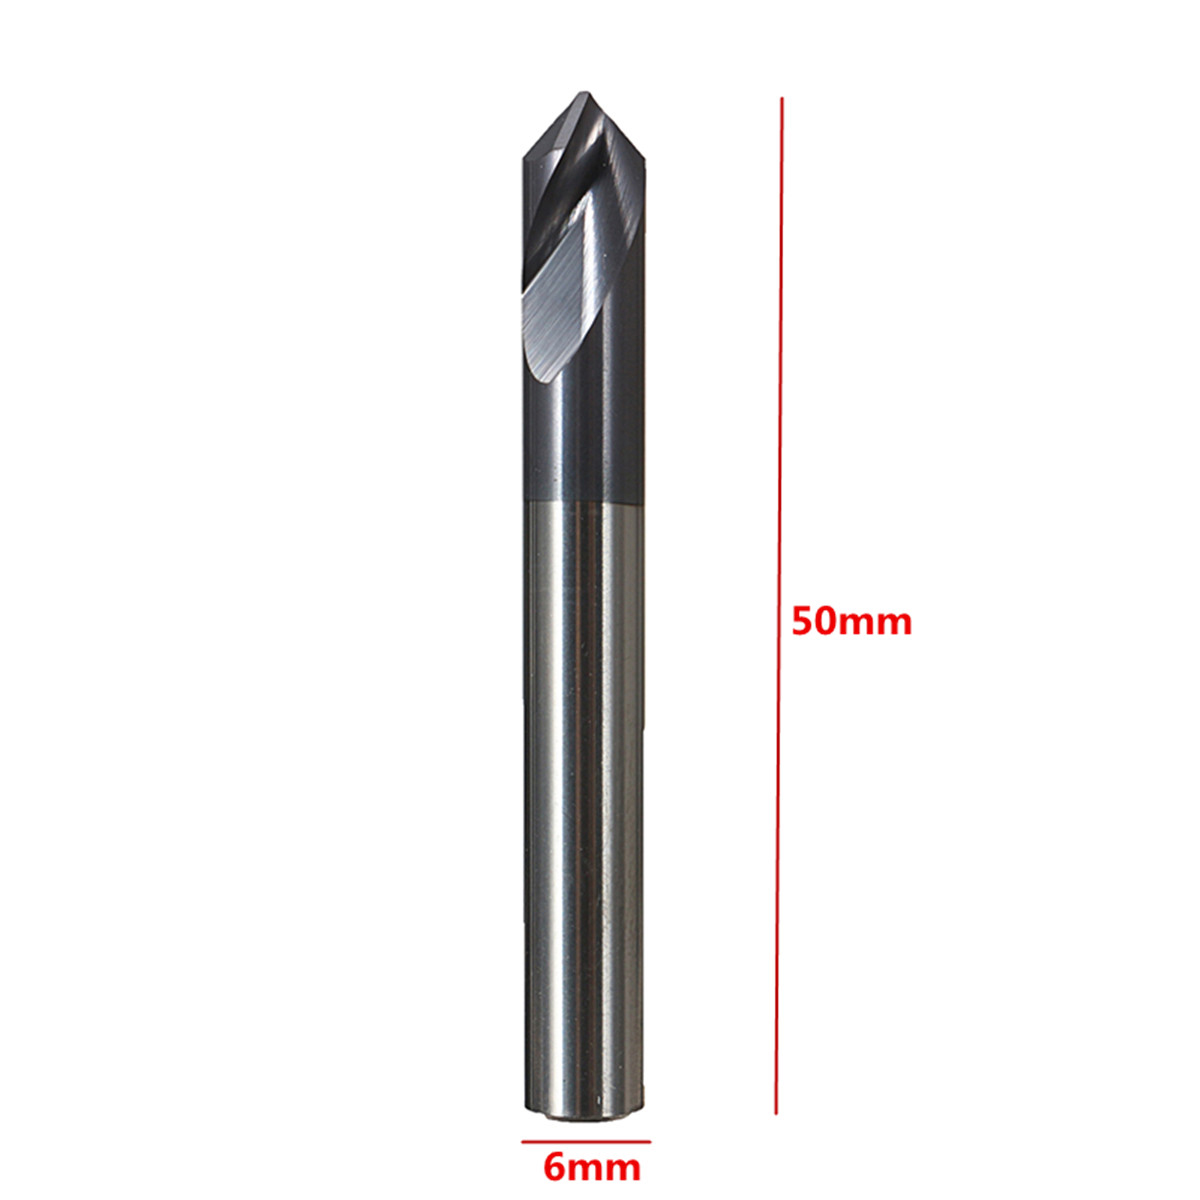 Drillpro-2-Flutes-6mm-Carbide-Chamfer-Mill-90-Degree-HRC45-Milling-Cutter-1108522-1